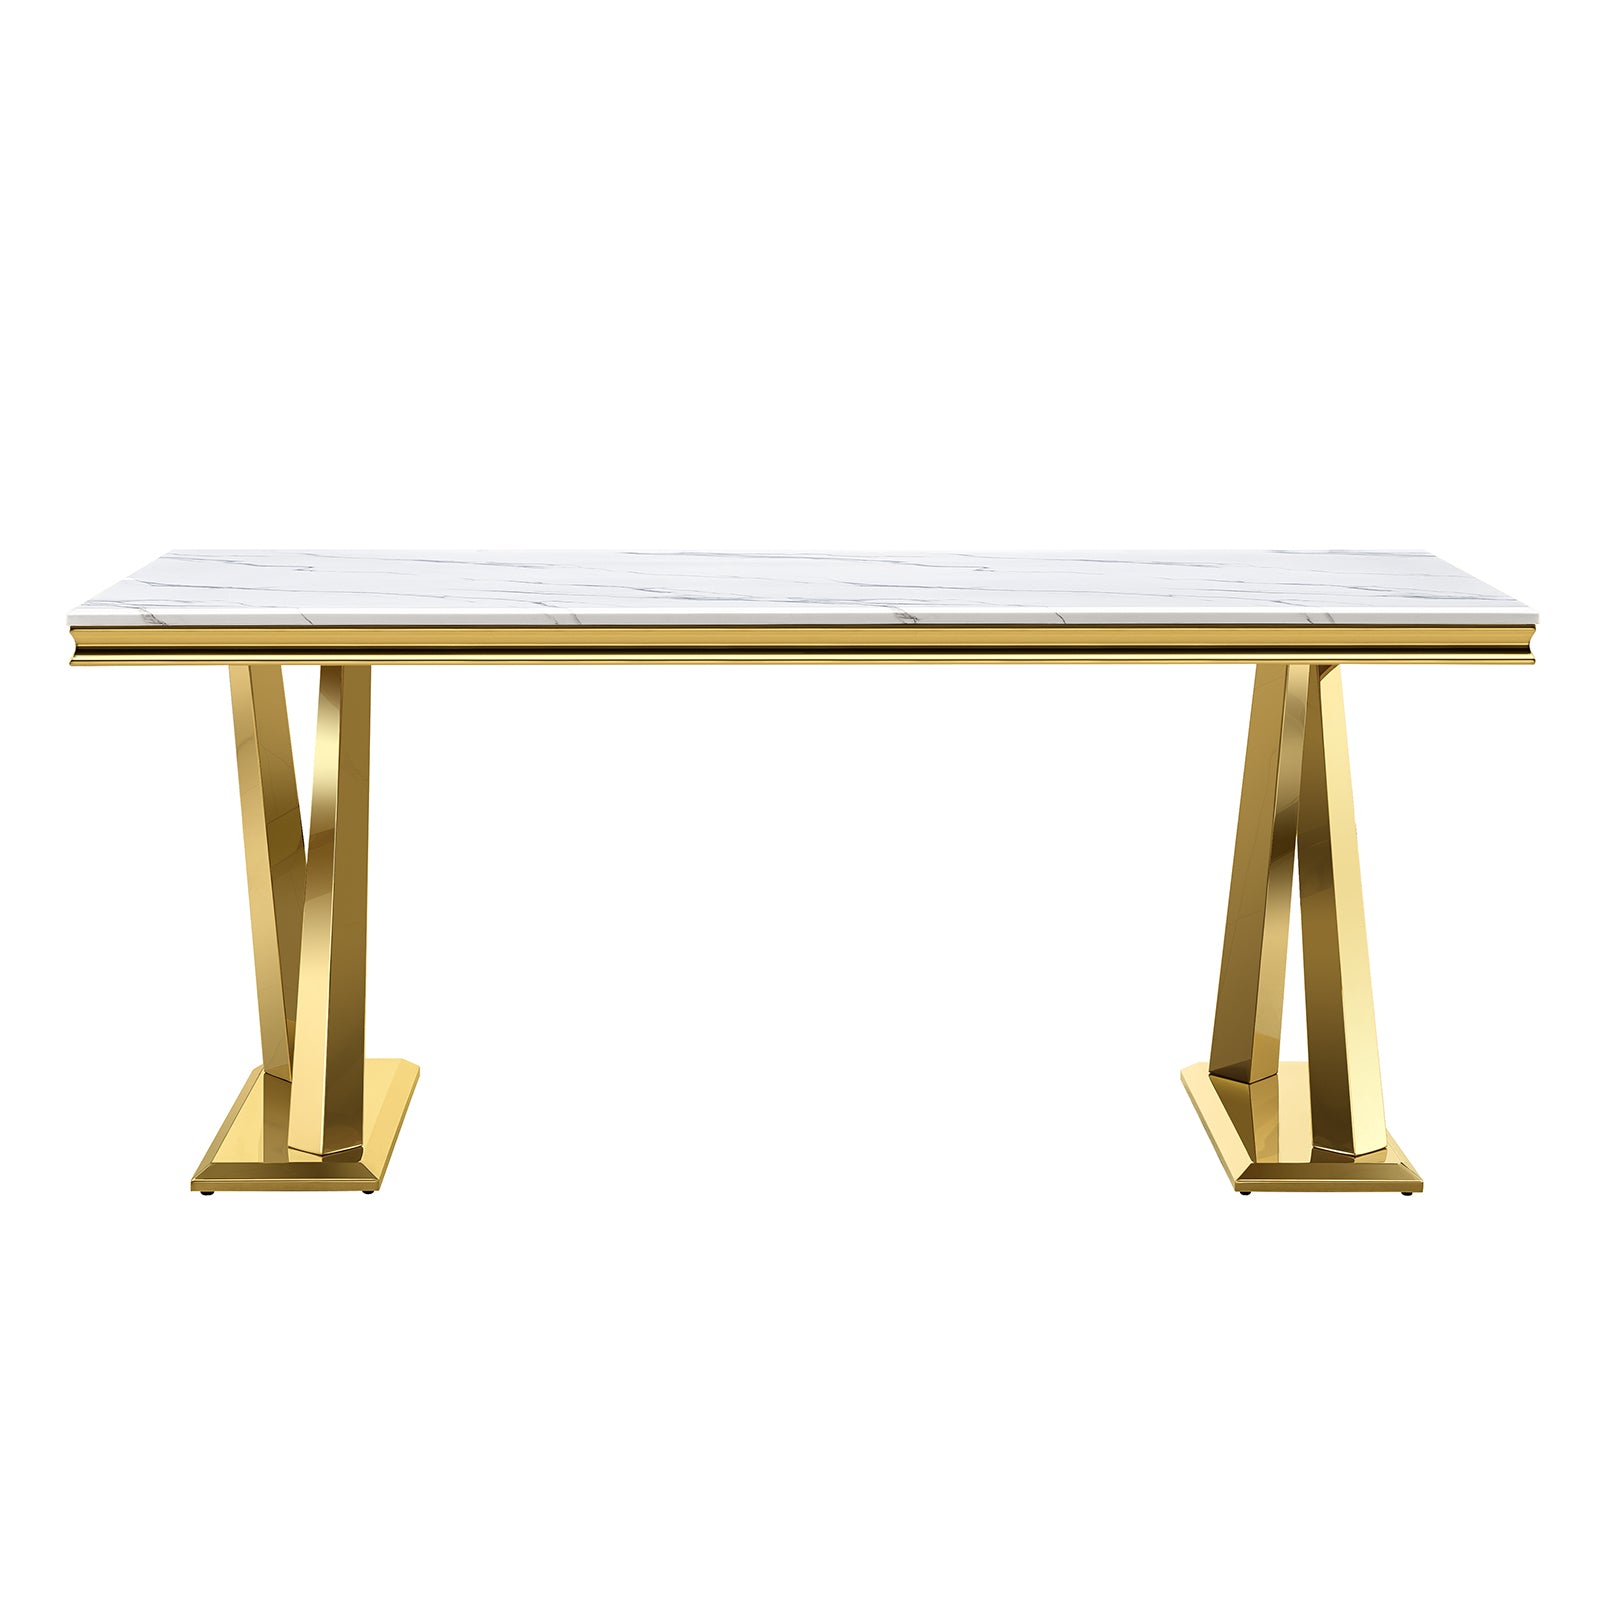 604-Set | AUZ White and Gold Dining room Sets for 6